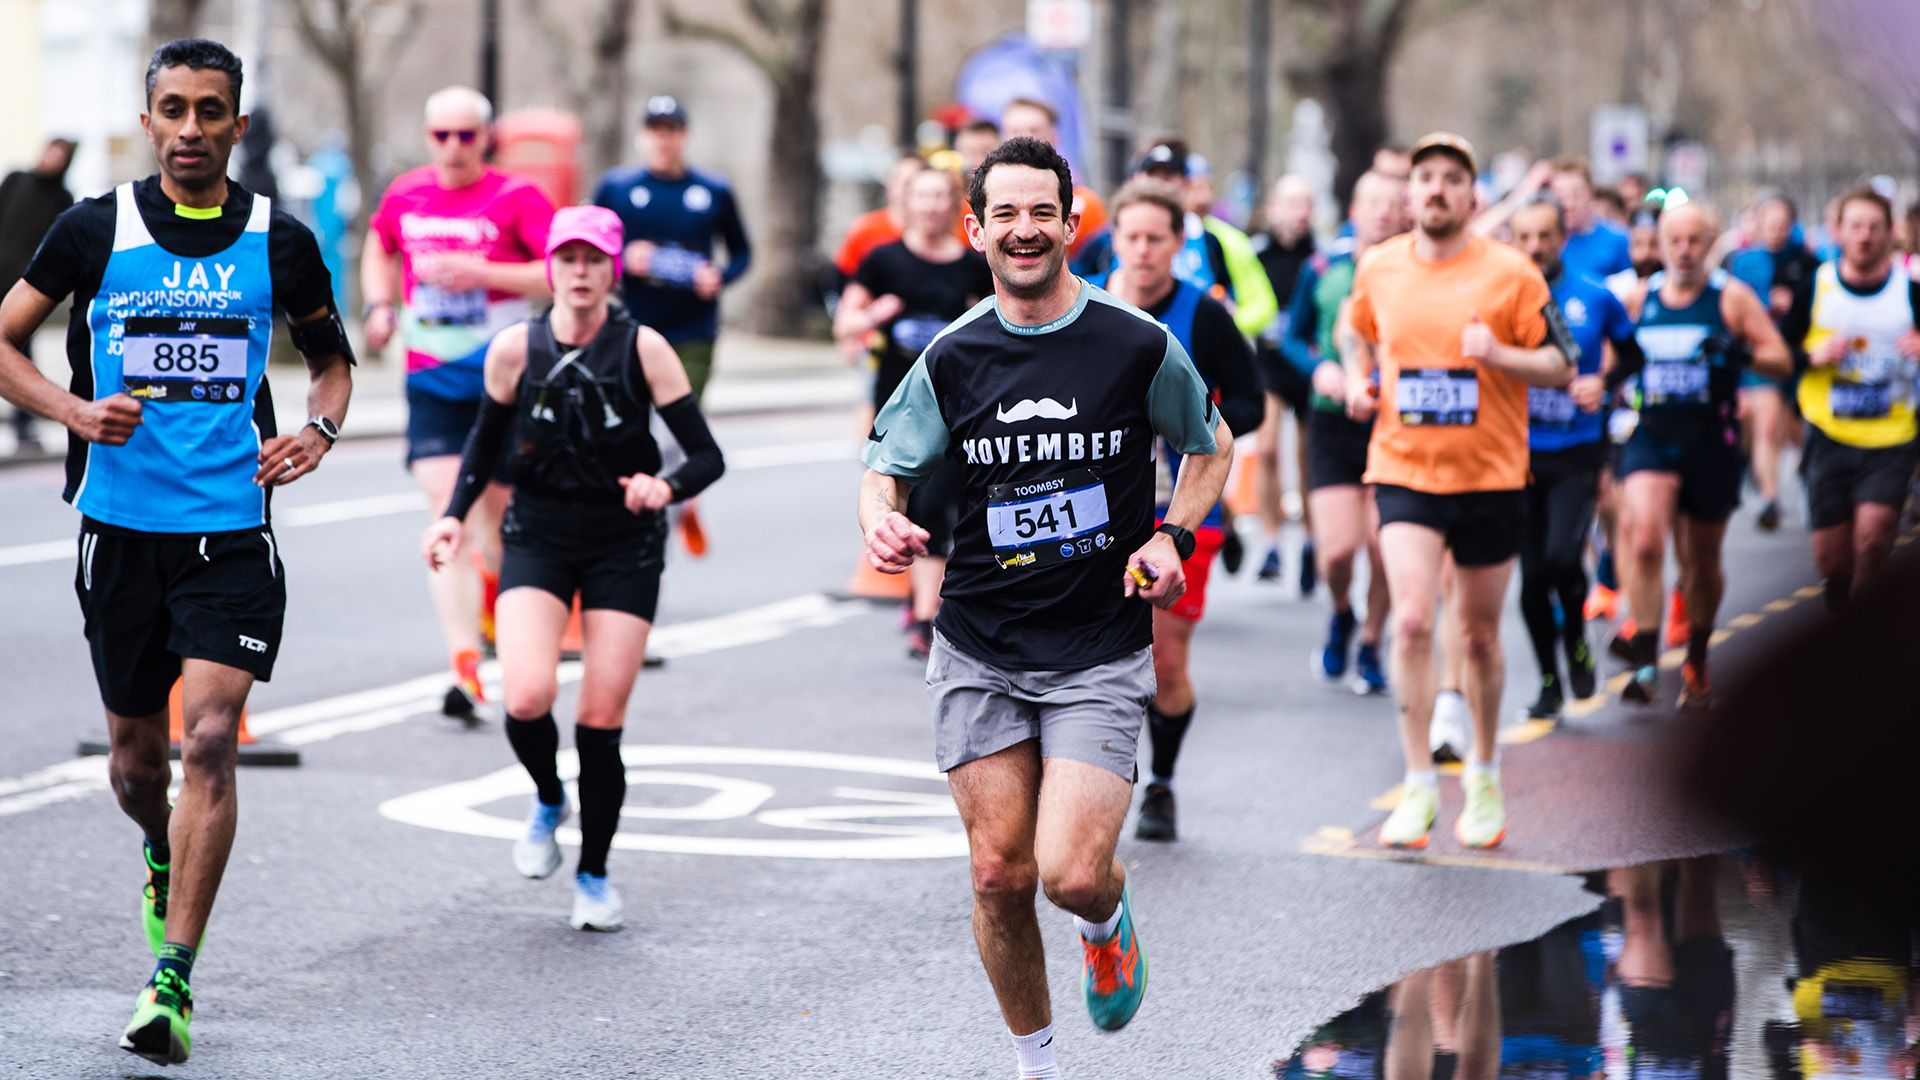 Crowd of runners in Movember-branded attire smiling to camera at a race.